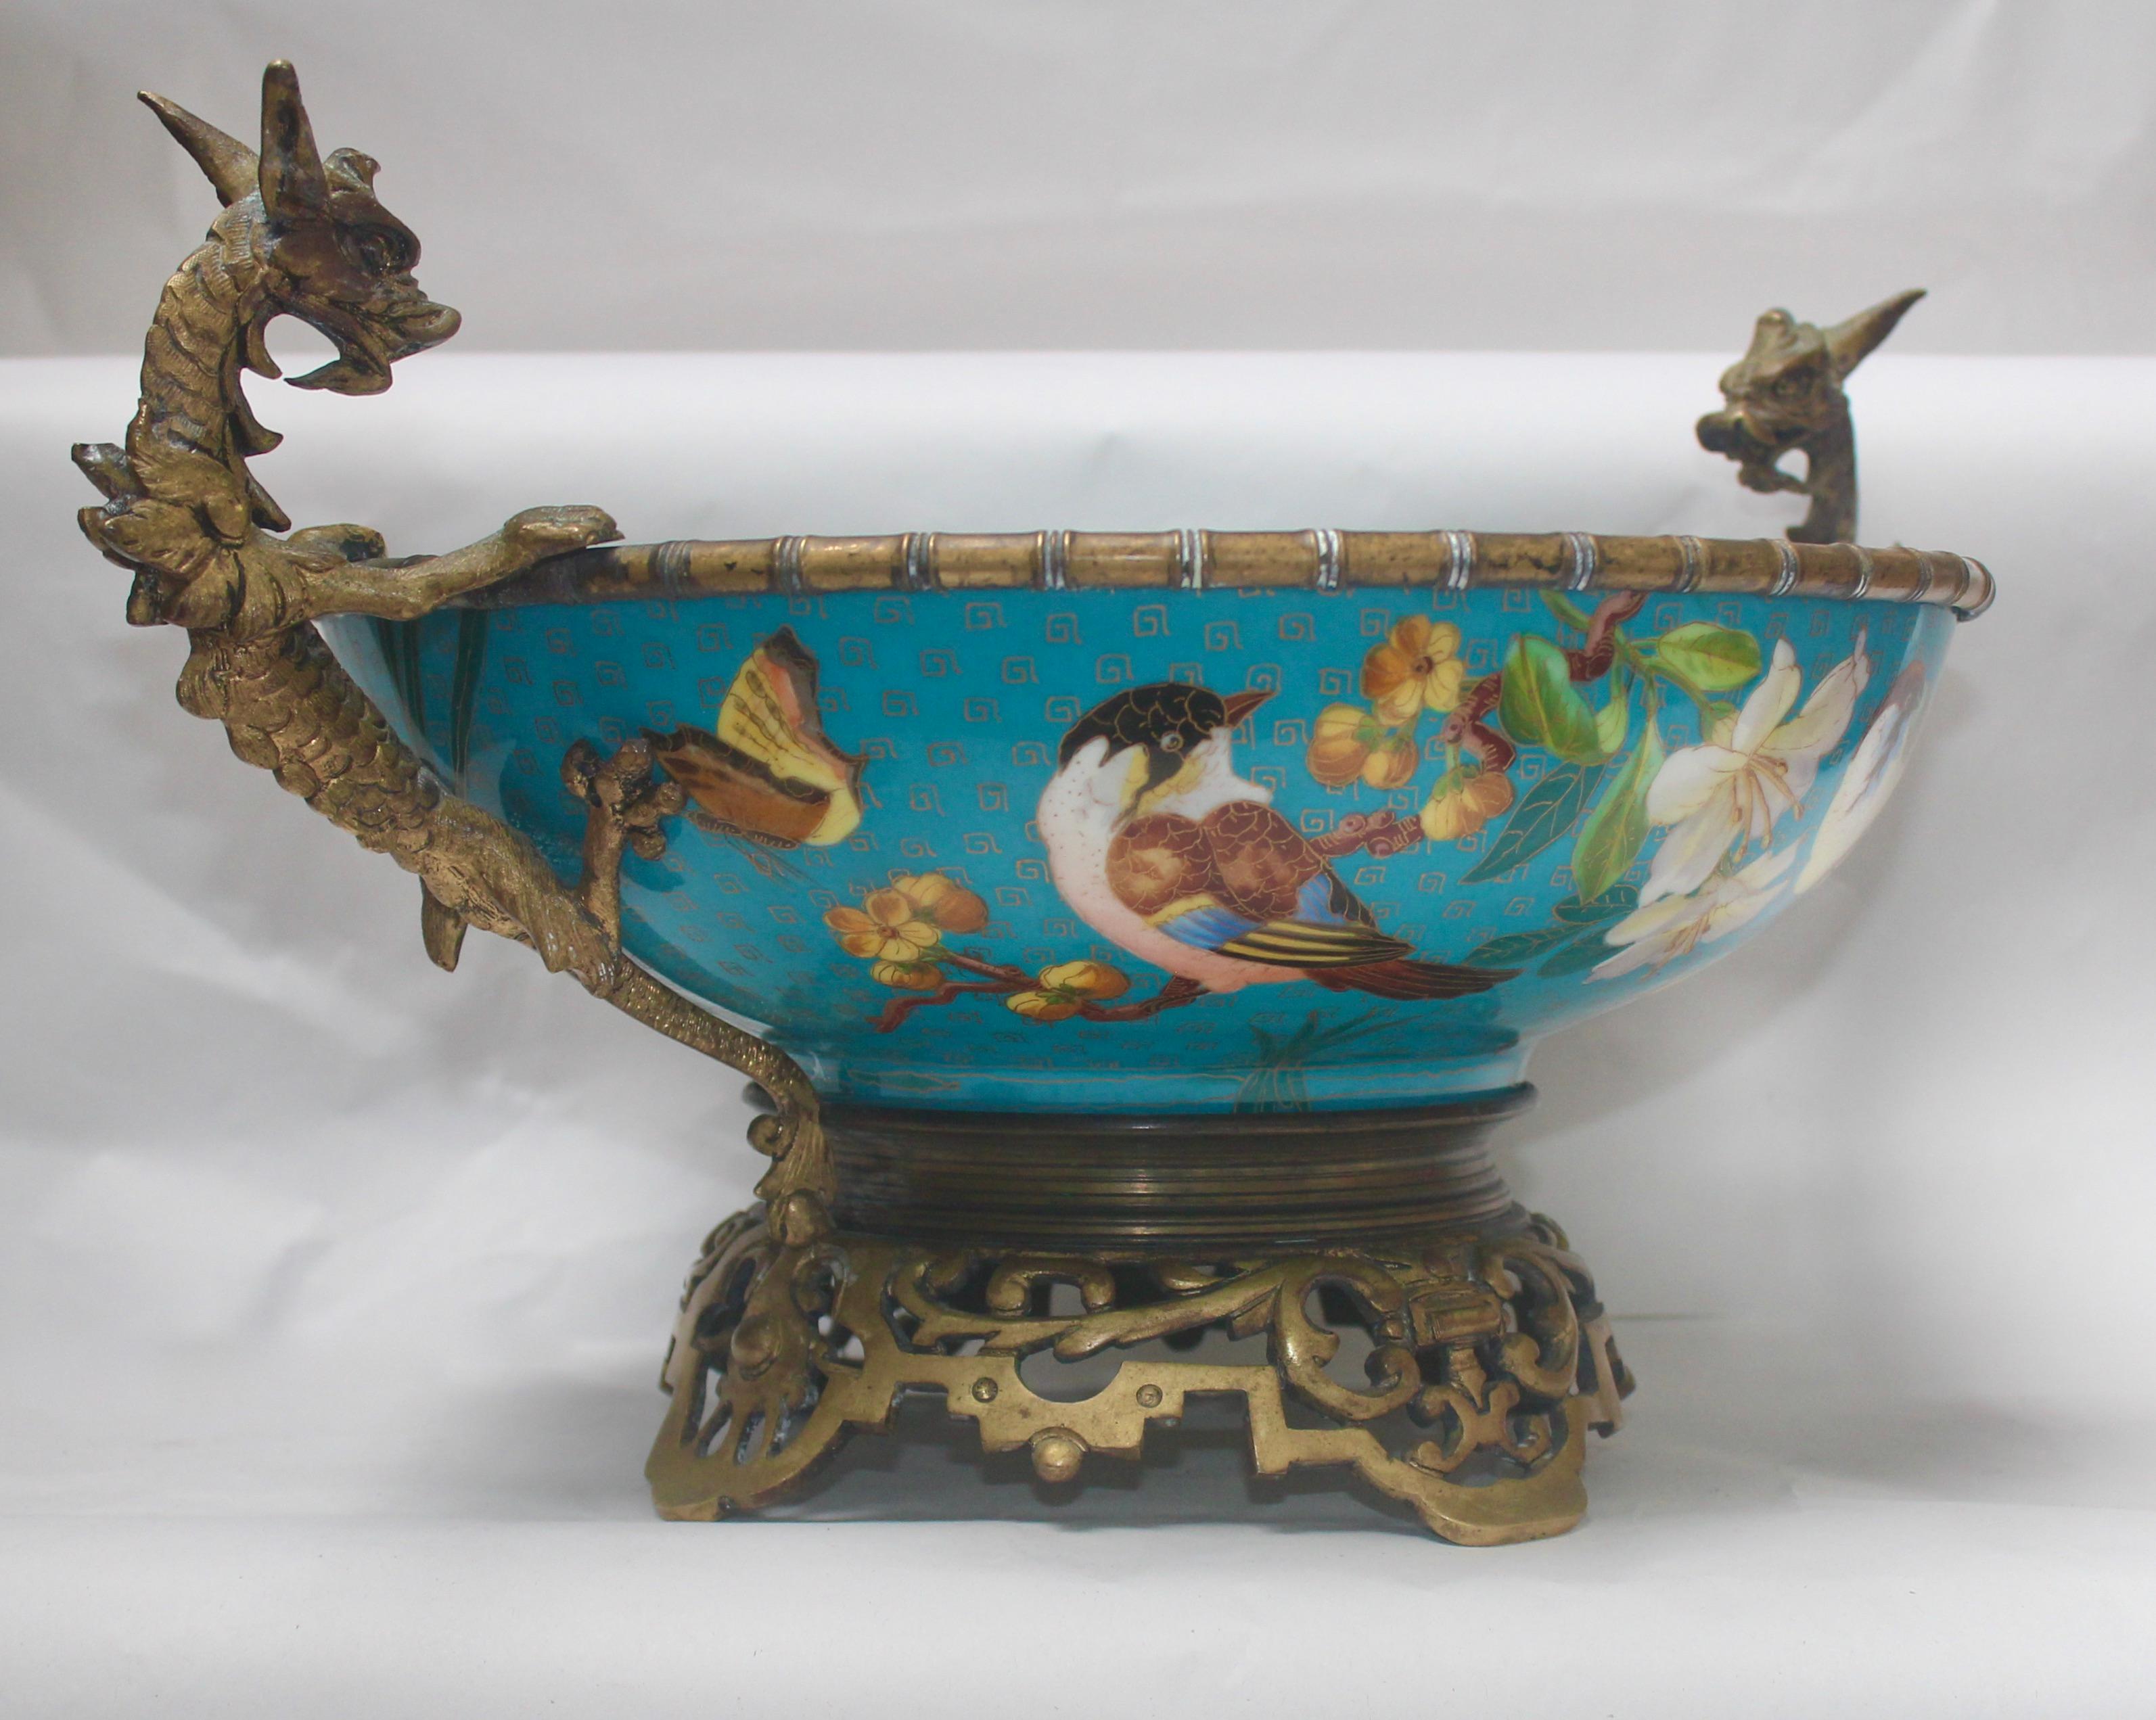 A circular French 19th century ormolu-mounted and polychromed porcelain centerpiece.
Designed and inspired in the Chinese taste with birds, butterflies, foliages and flowers on a blue-ground simulating Chinese cloisonné enamel.
The mounts with two